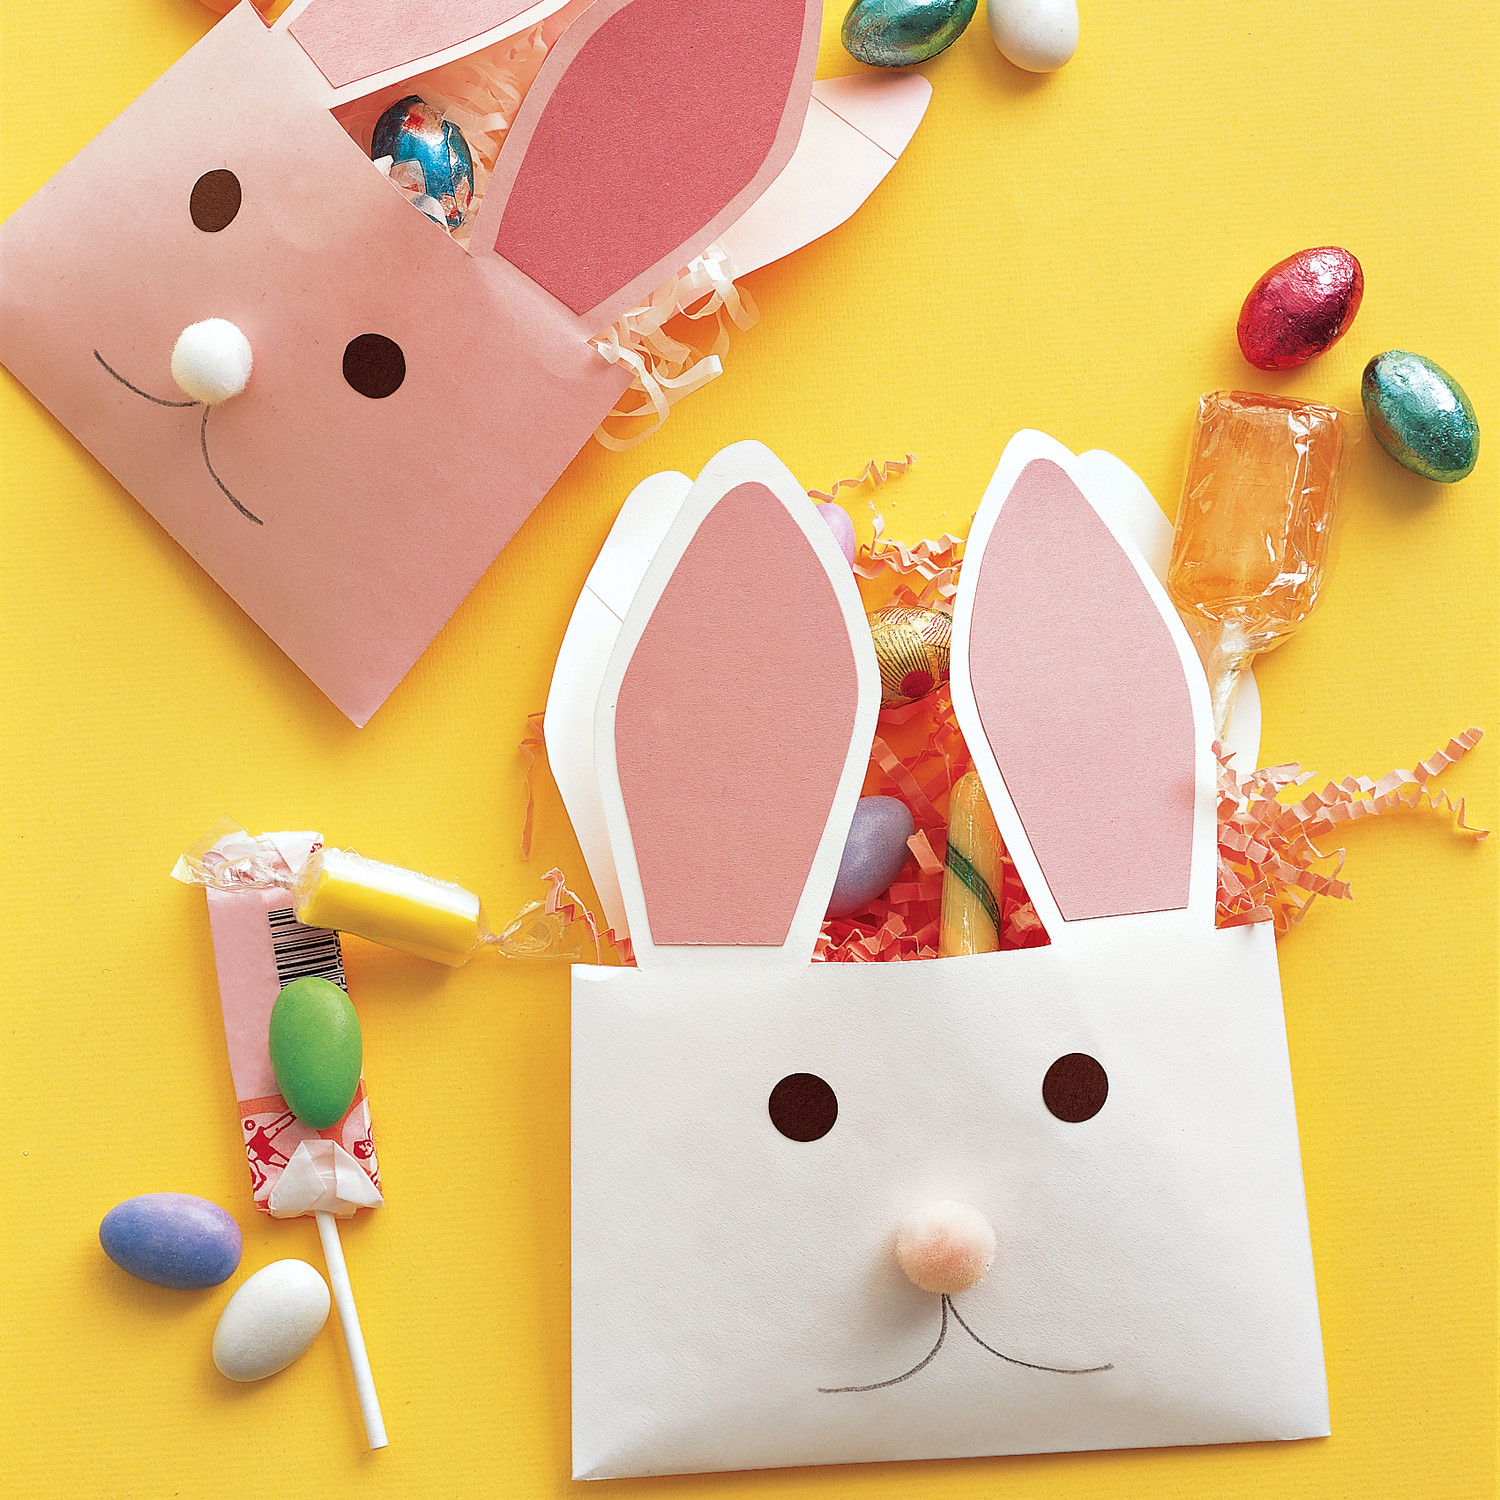 Easter Craft Ideas For Toddlers
 The Best Easter Crafts and Activities for Kids